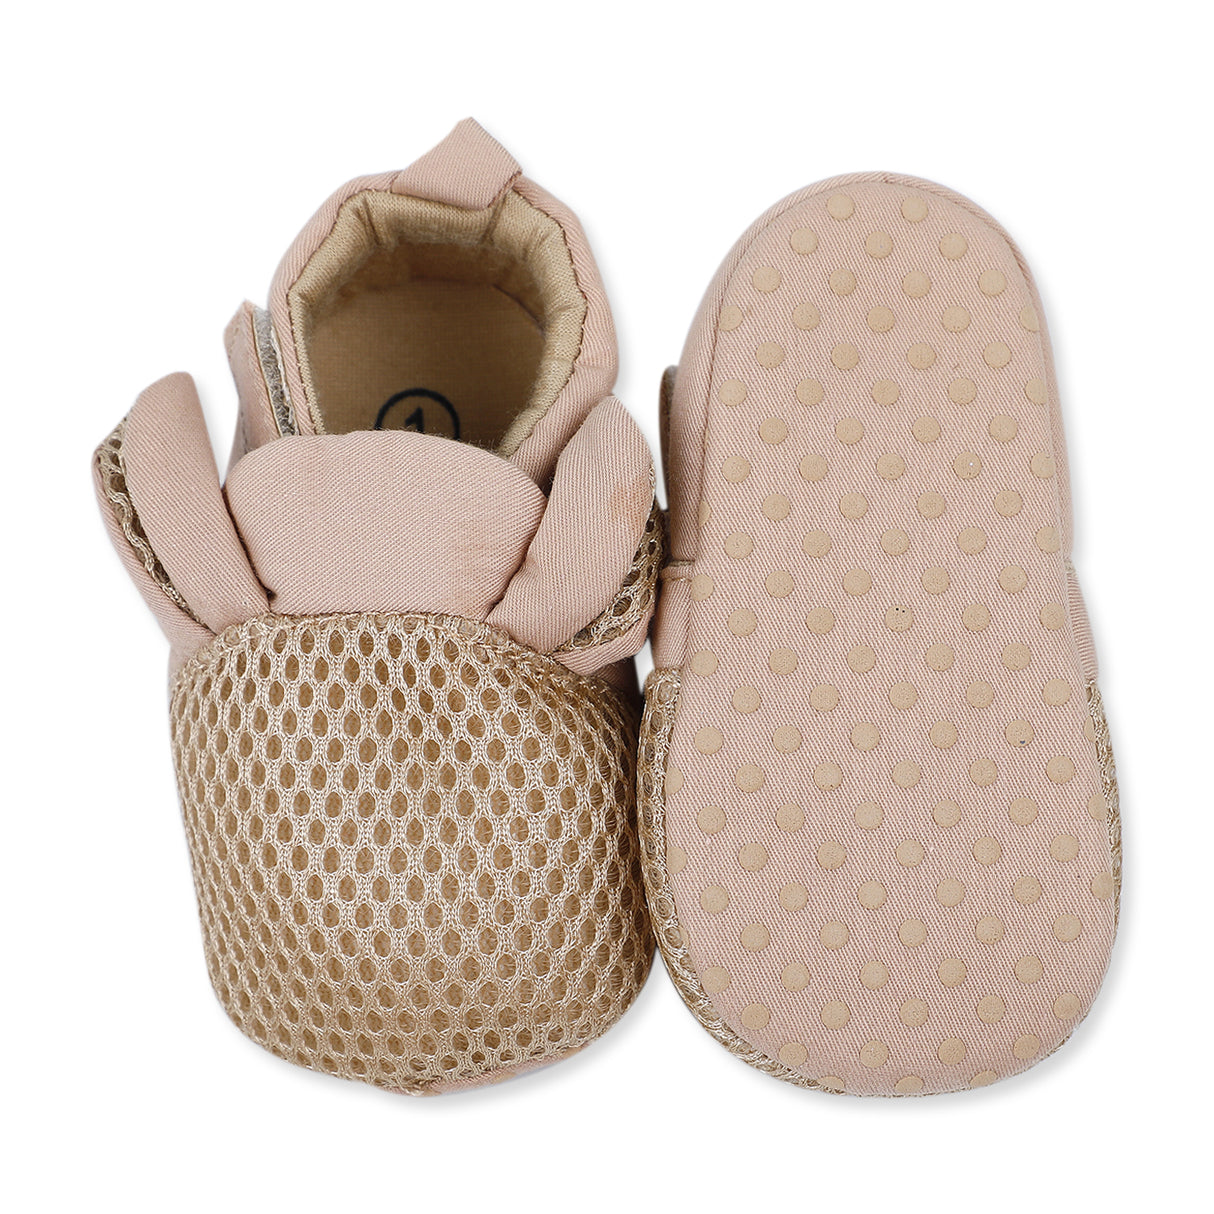 Net Dotted Girls Soft Anti-Skid Booties